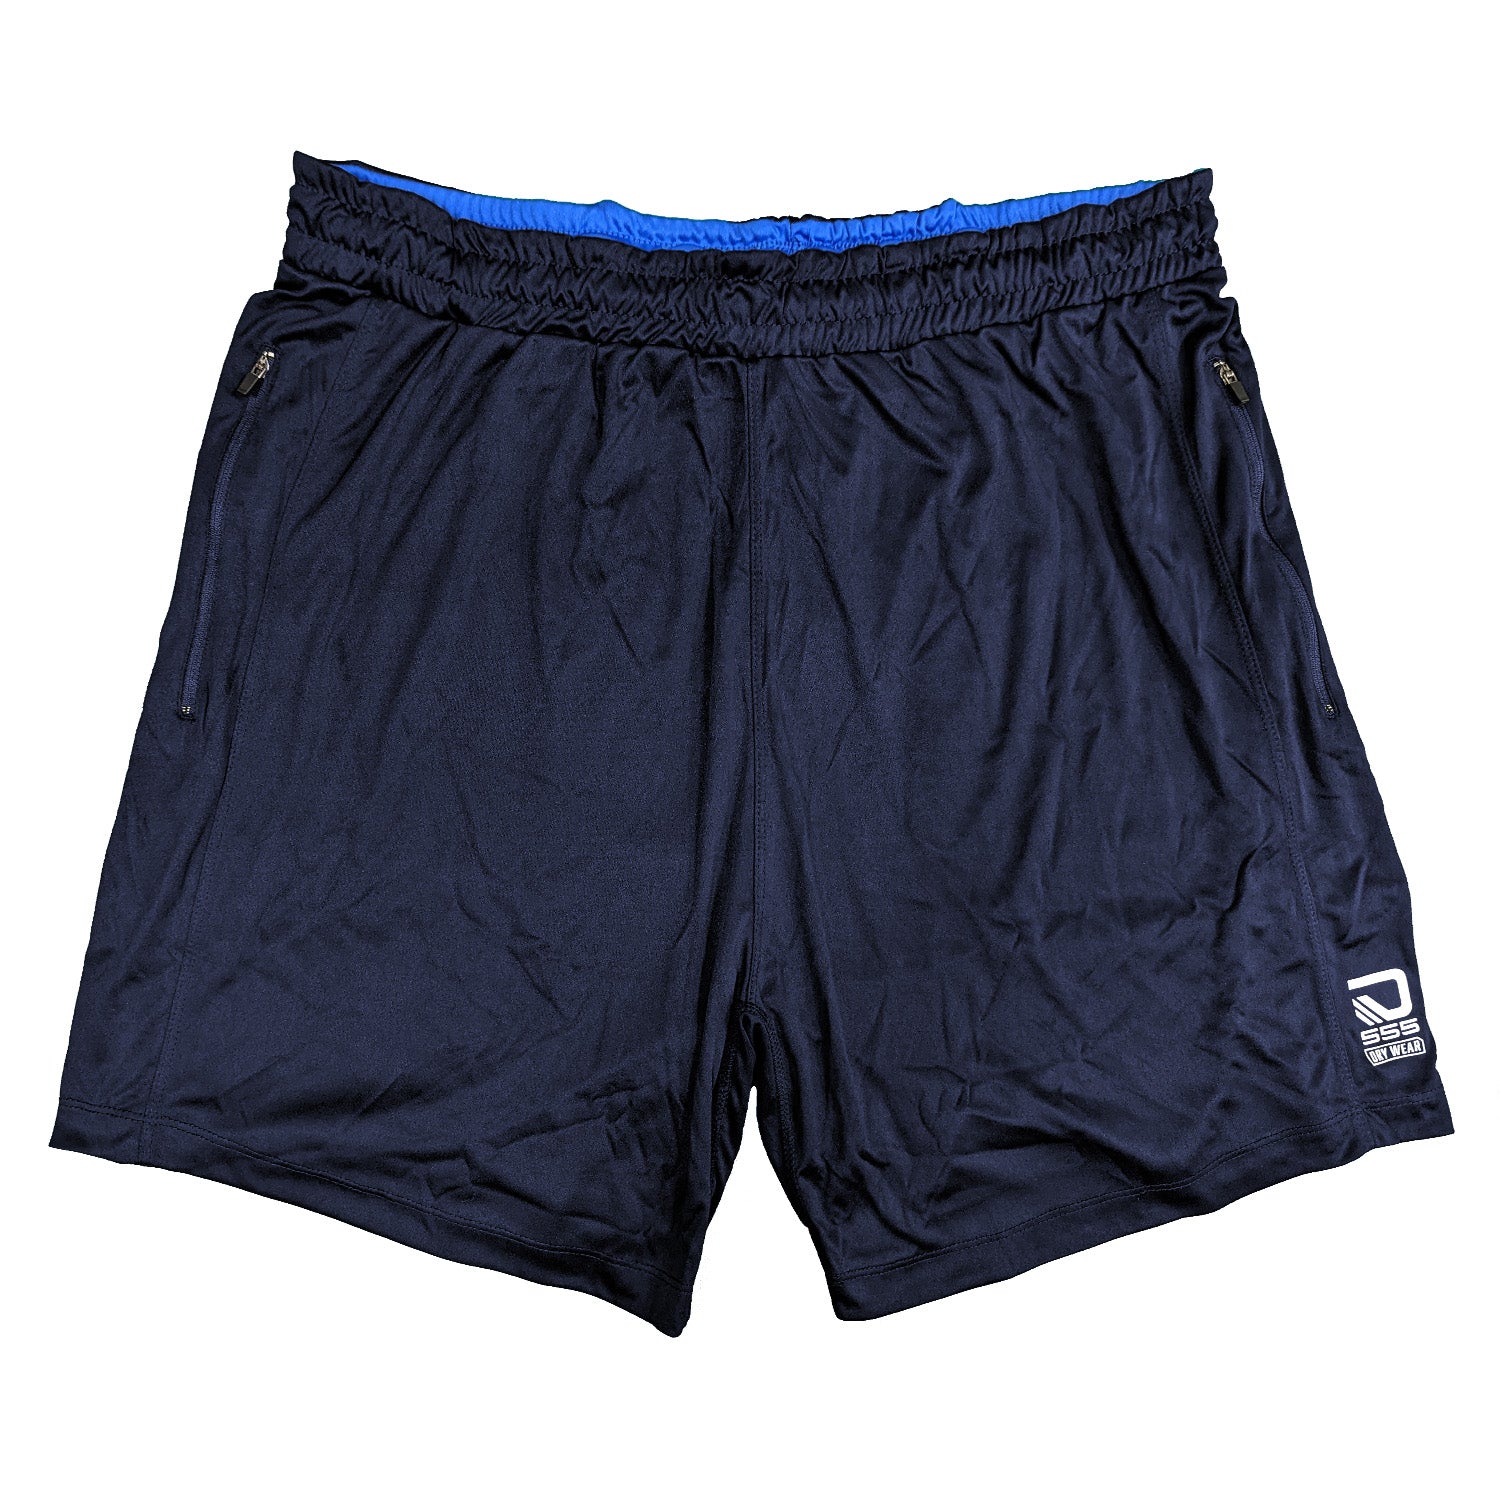 D555 Dry Wear Performance Shorts - Slough (211201) - Navy 1